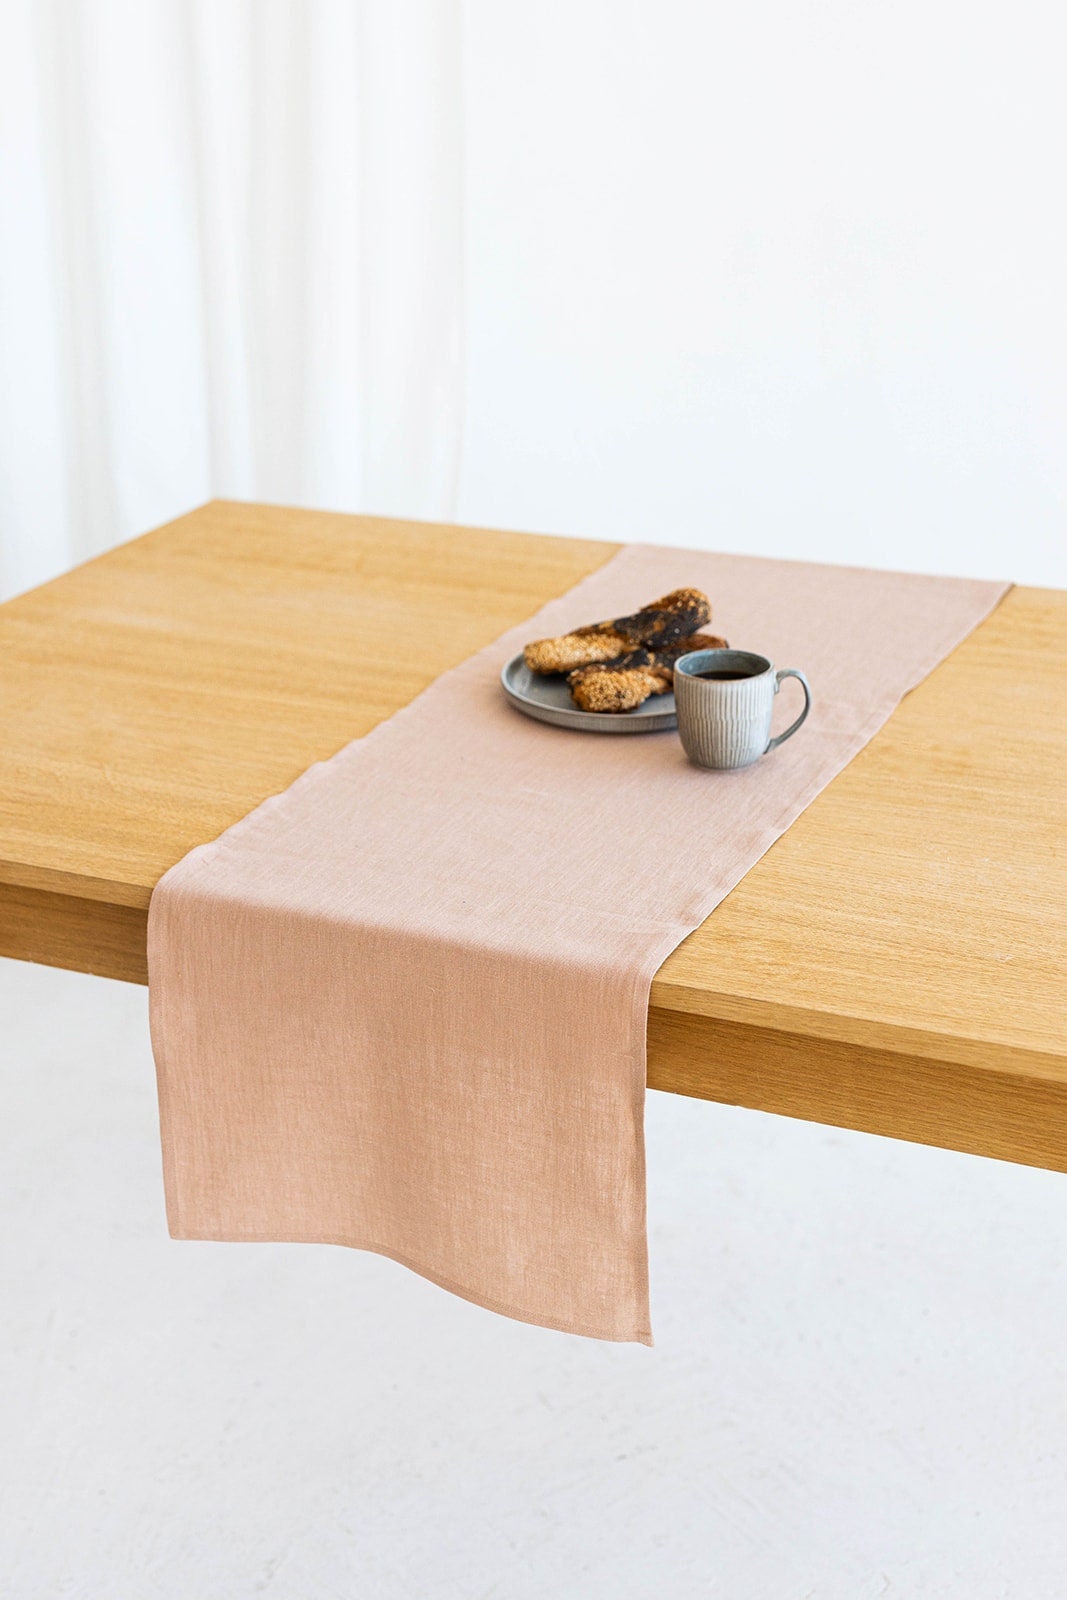 Linen Table Runner On Table In Powder Color - Daily Linen